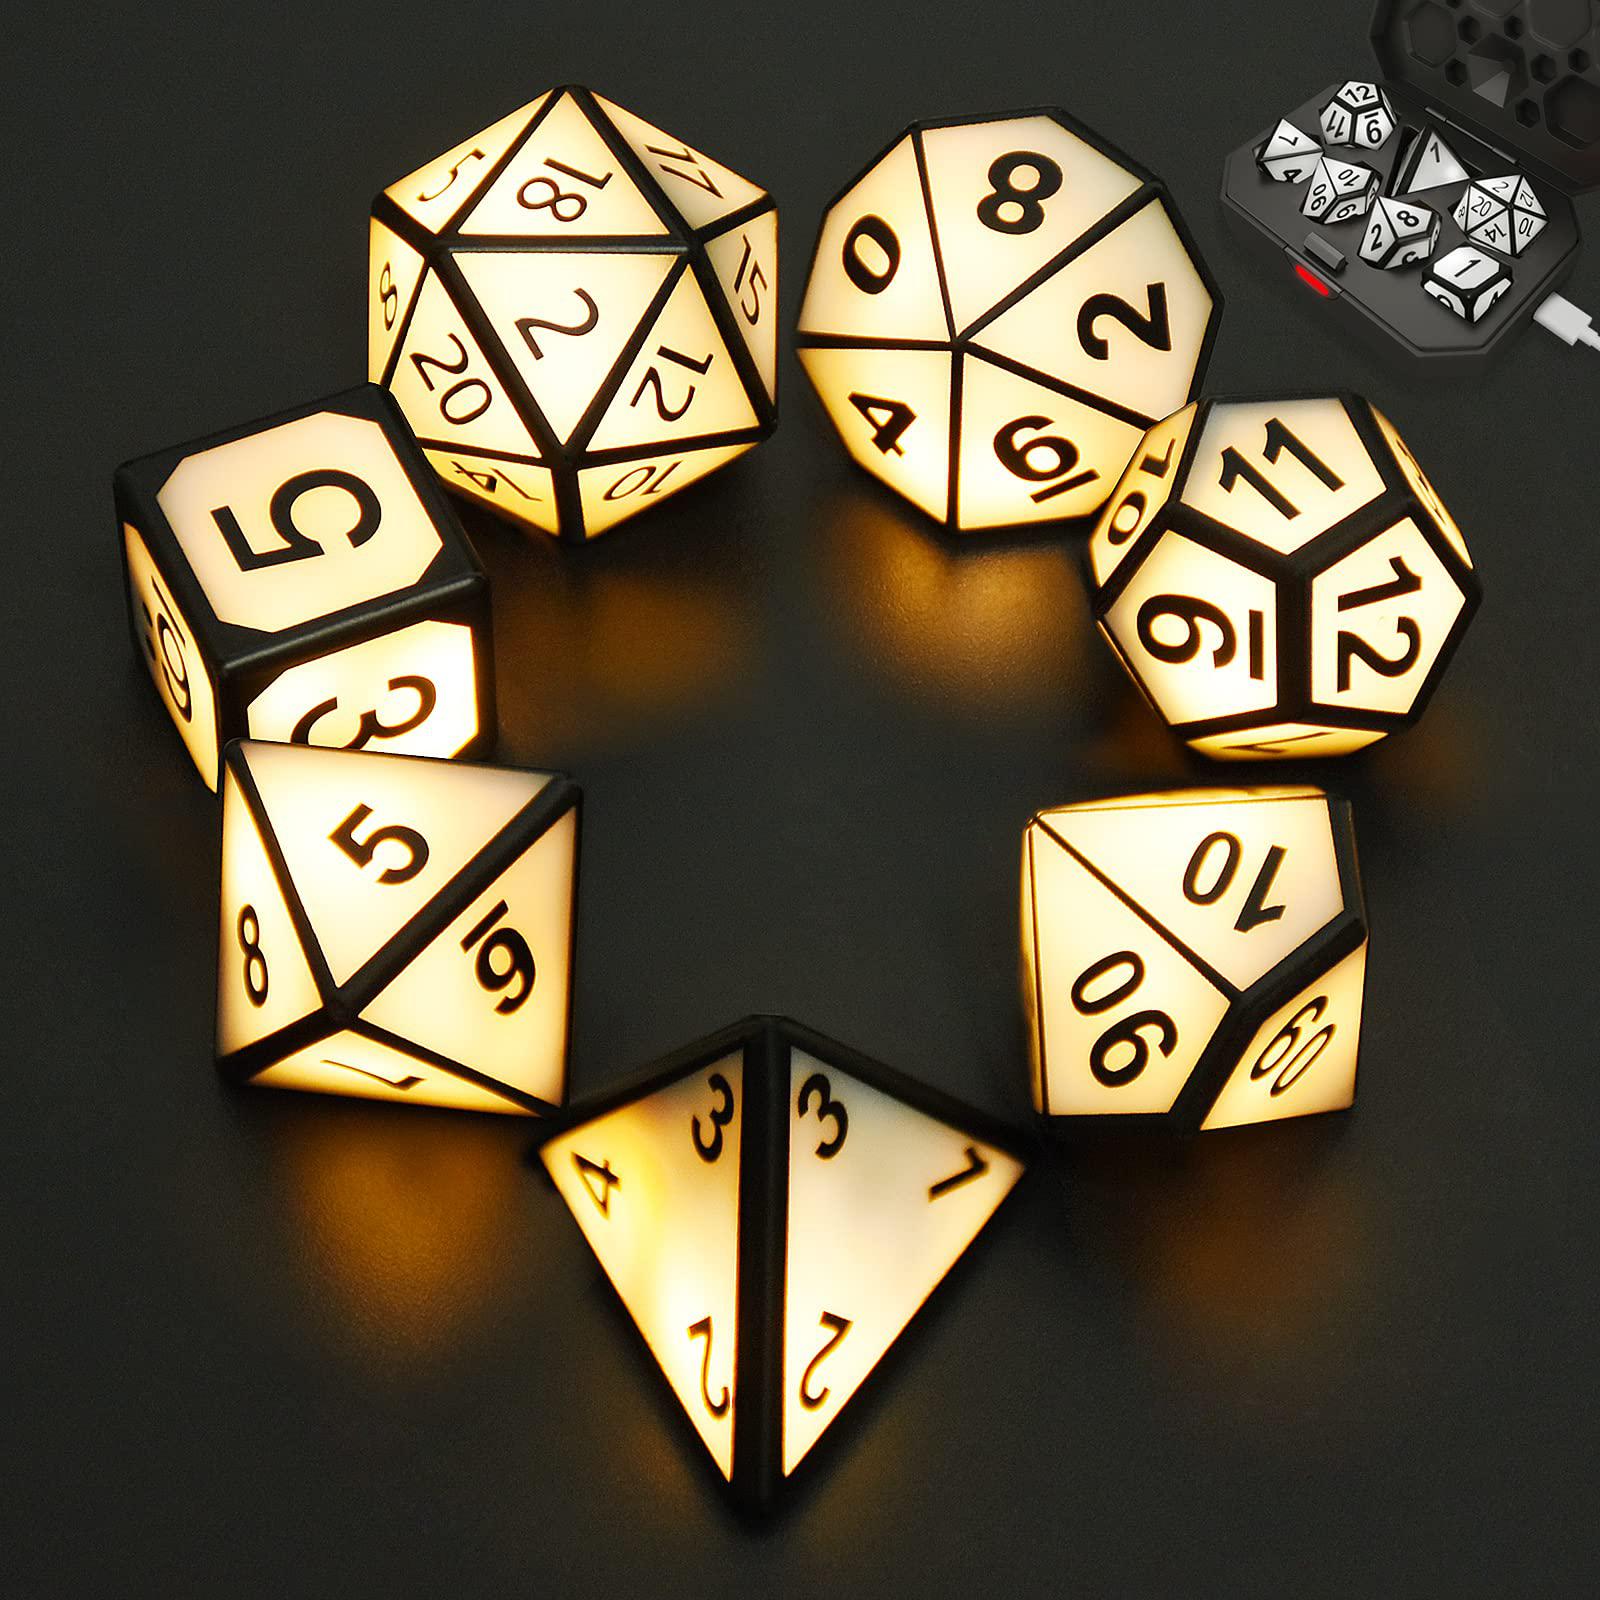 SEEROOTOYS light up dnd dice, usb rechargeable electric dice with charging box, 7 pcs glowing polyhedral dice set, shake to led d&d dice